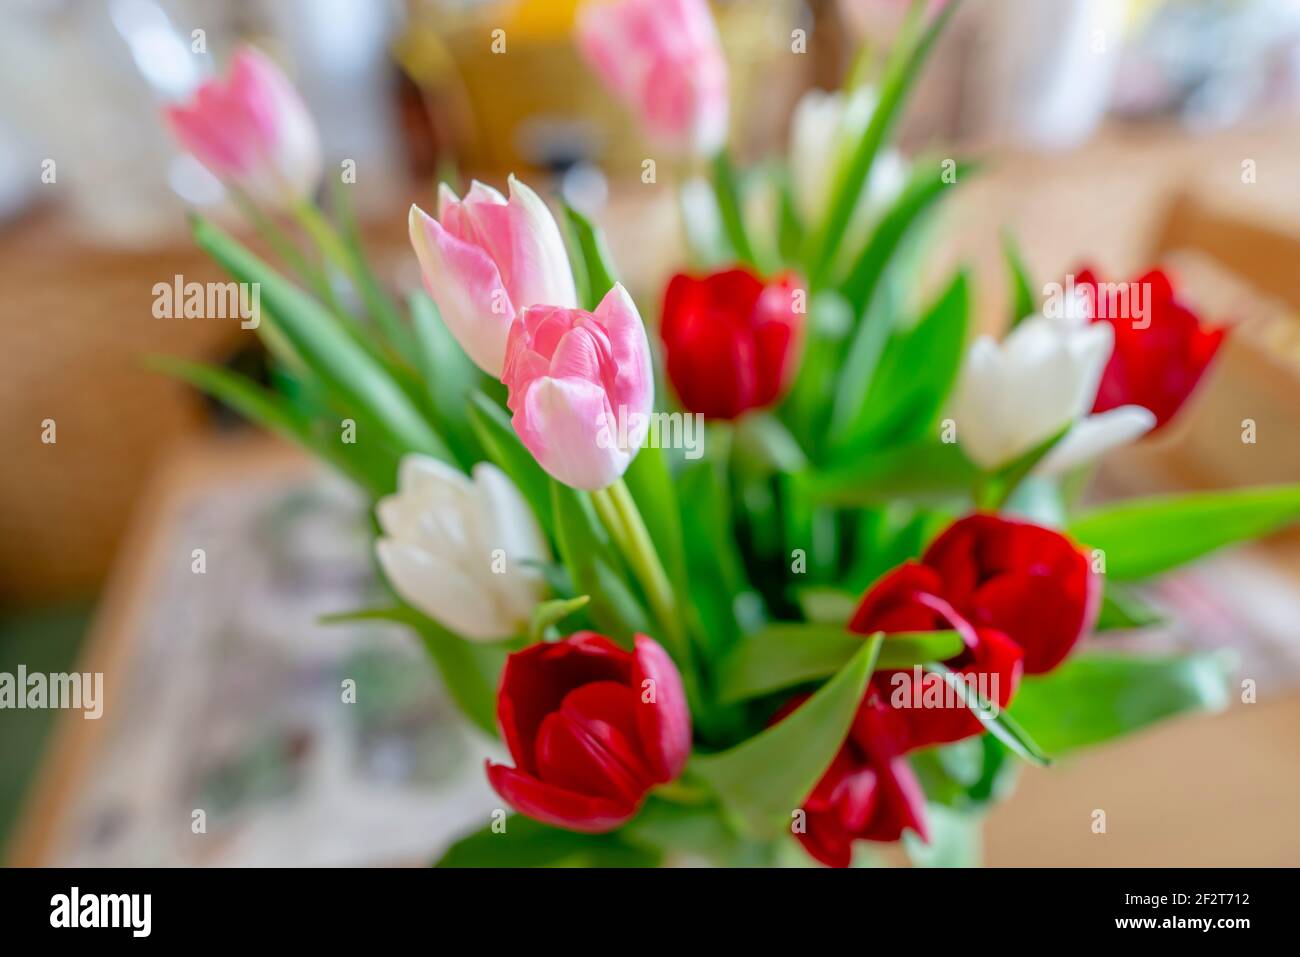 A bouquet of colorful tulips Stock Photo